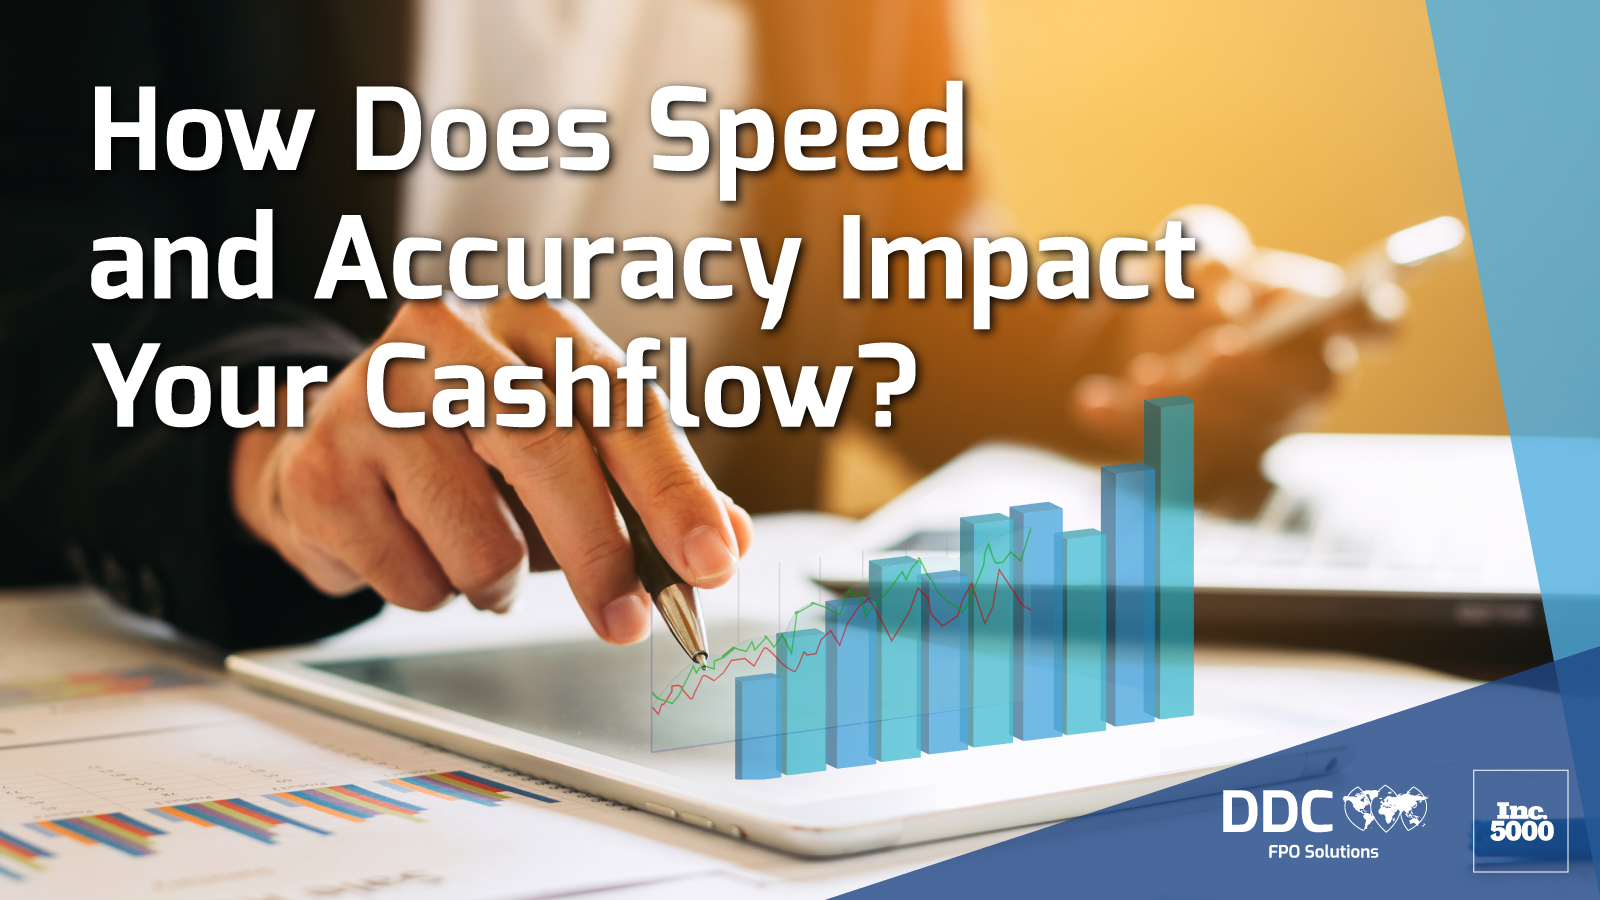 How Does Speed and Accuracy Impact Your Cash Flow?